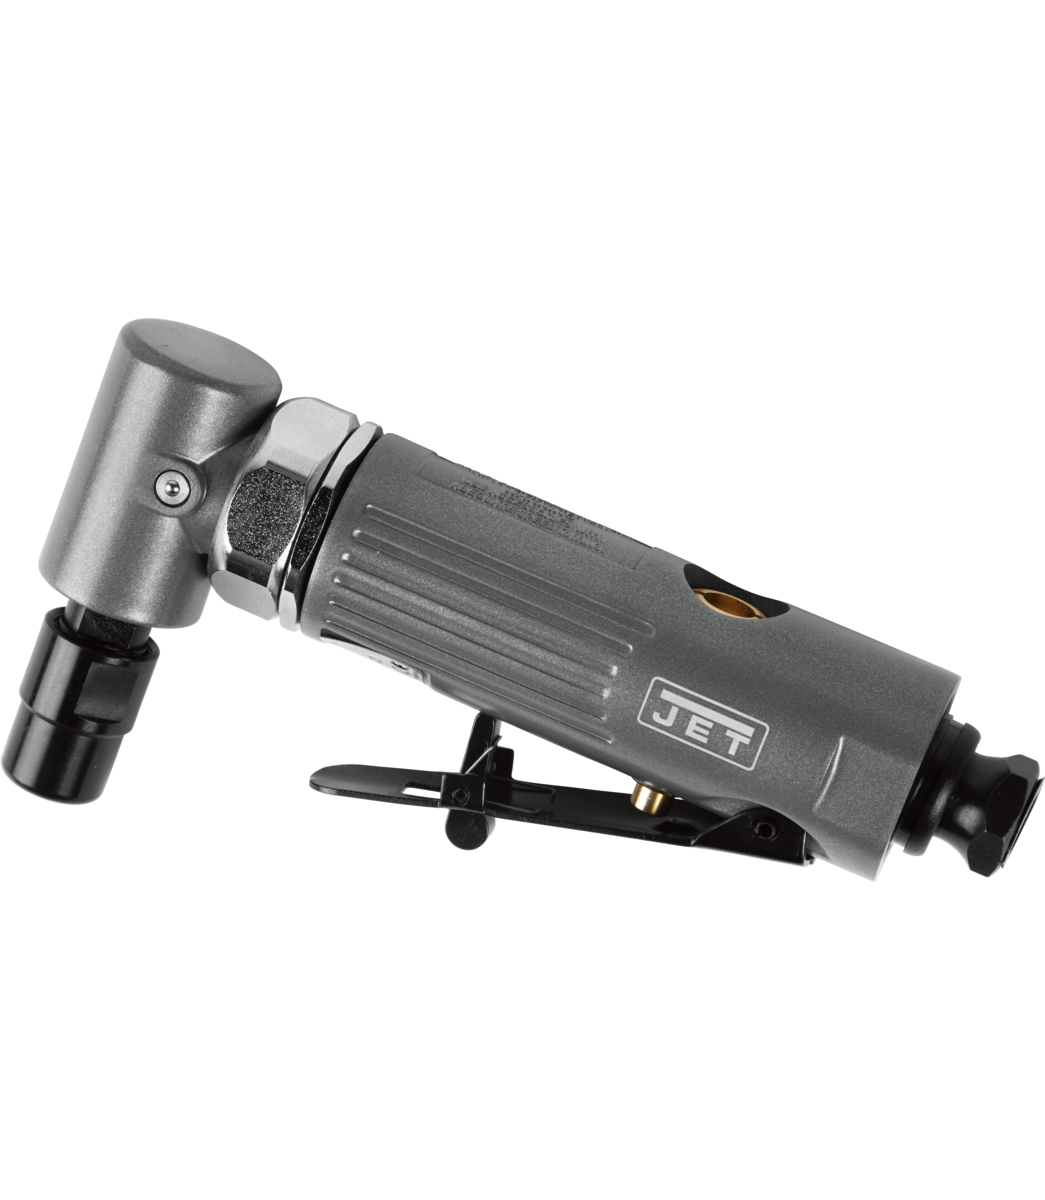 JET 1/4" Right Angle Die Grinder